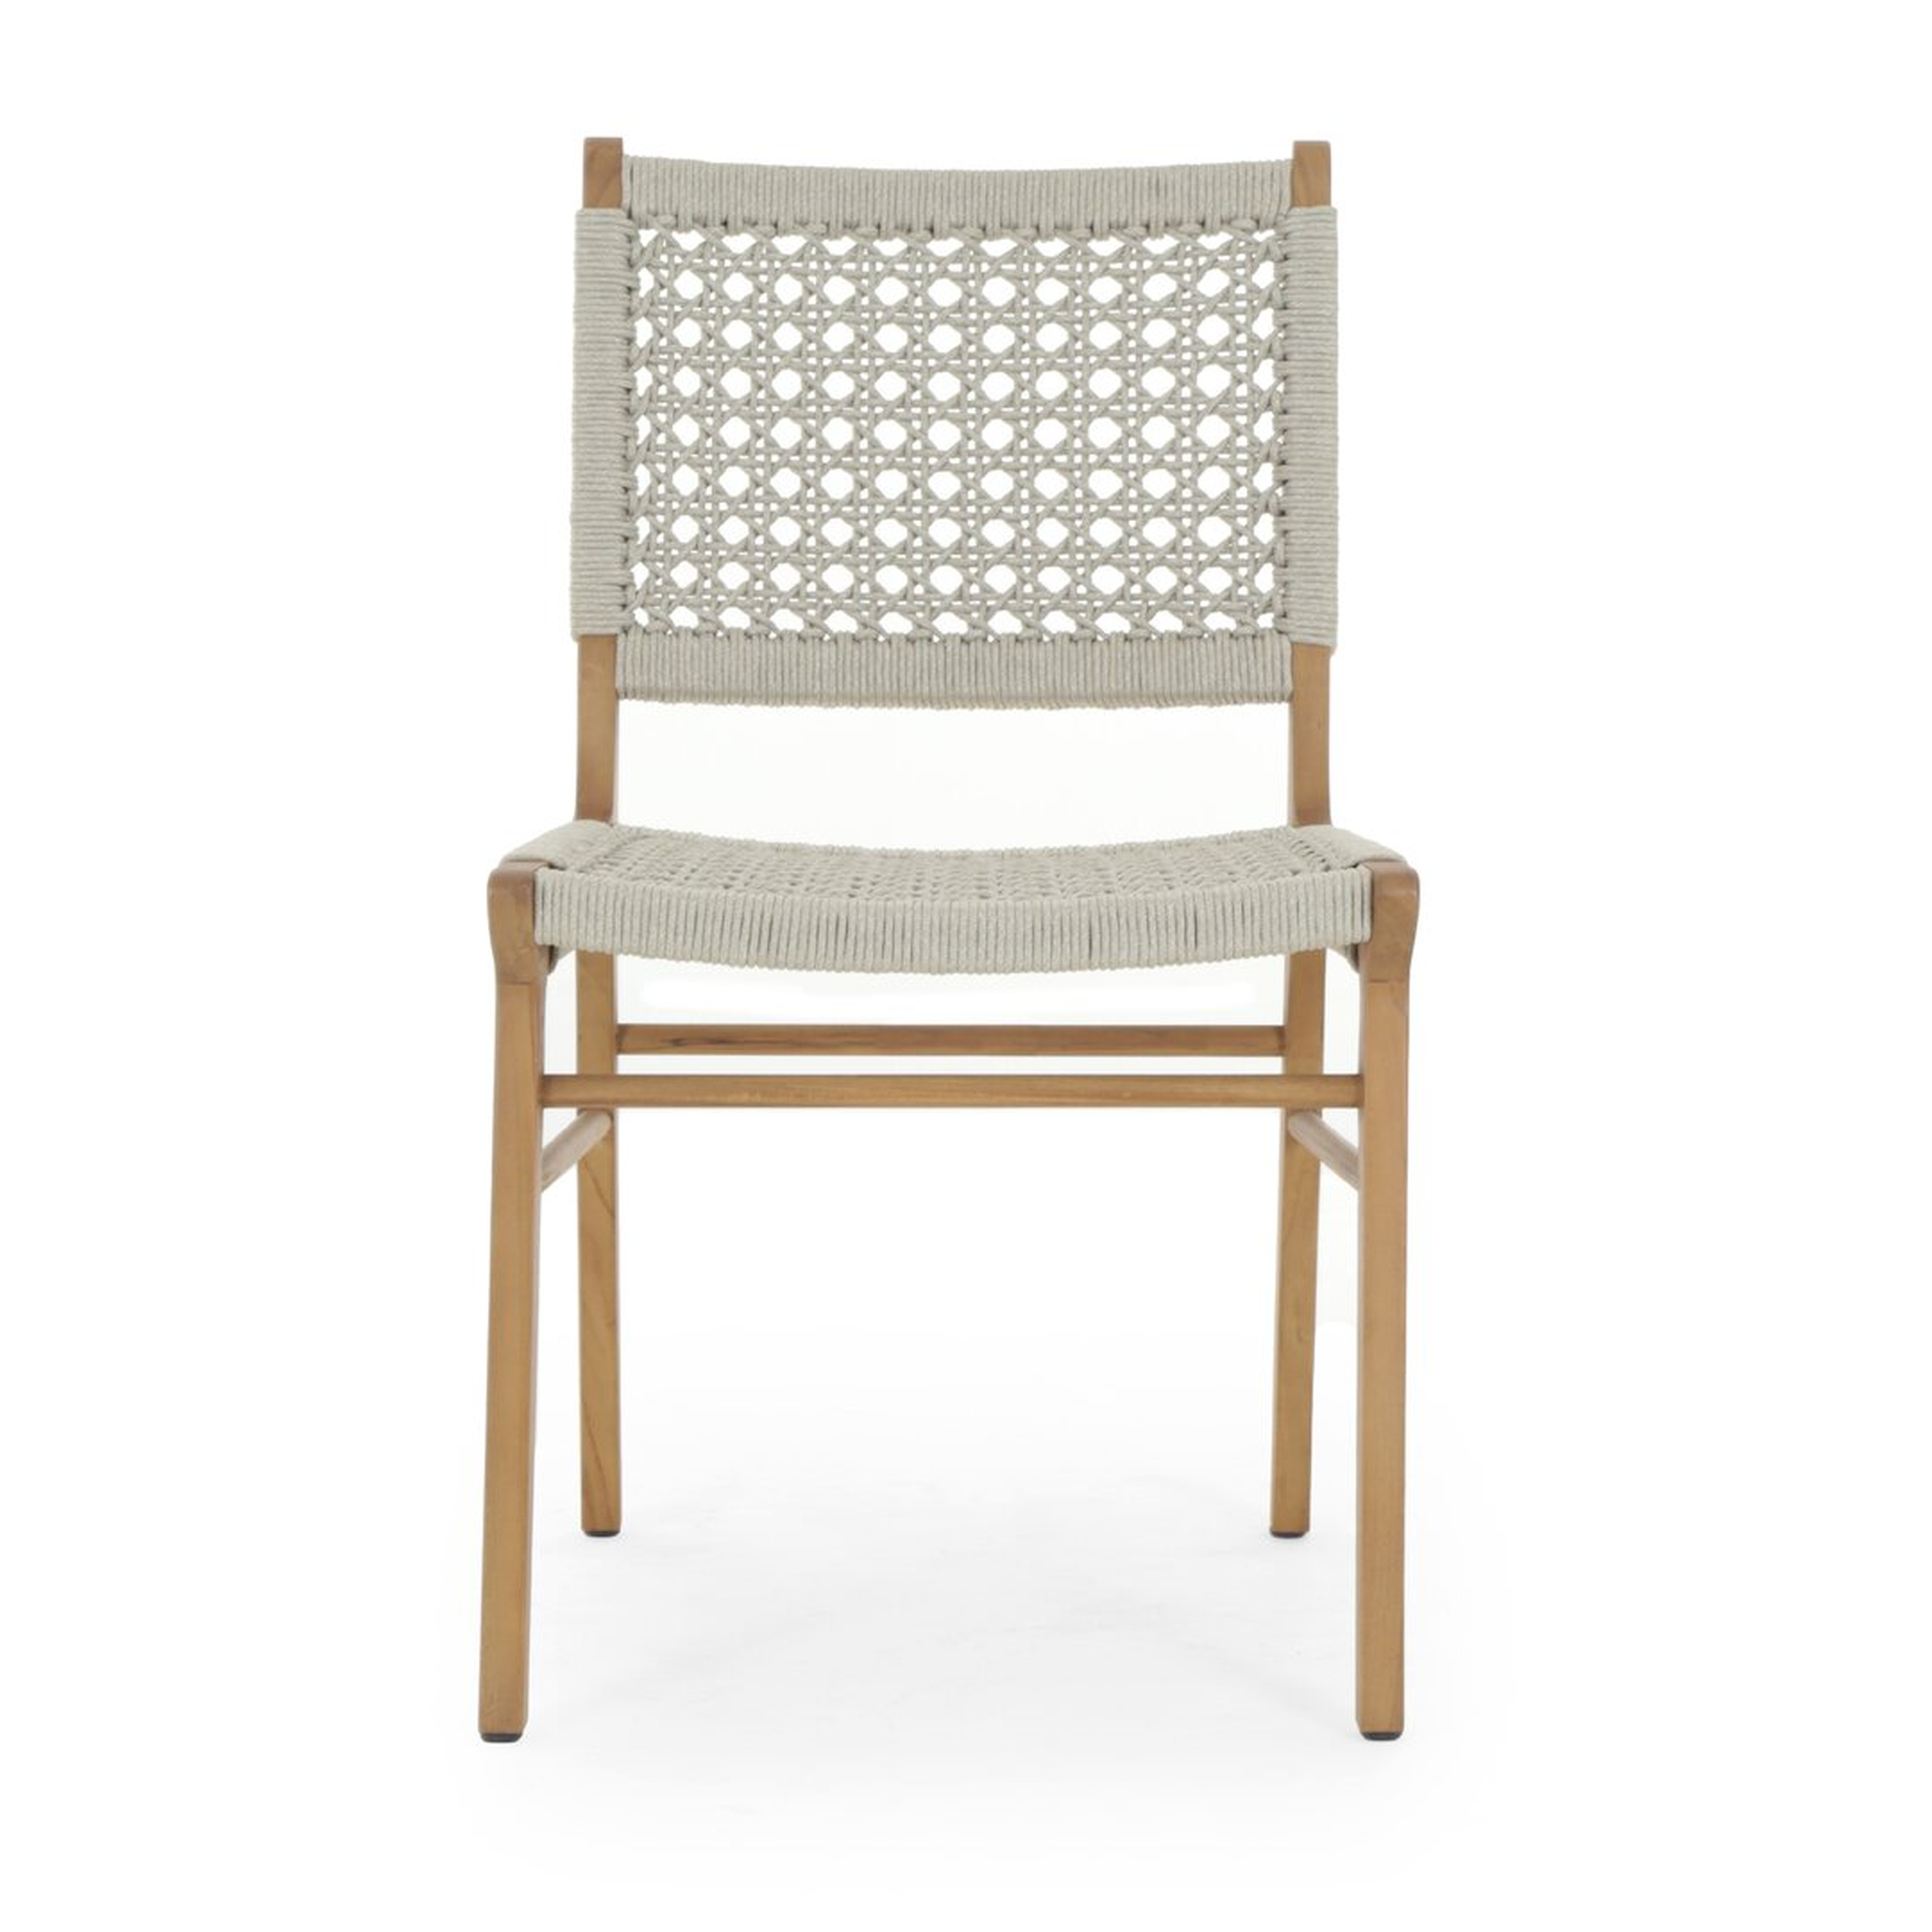 "Four Hands Delmar Outdoor Dining Chair-Natural" - Perigold